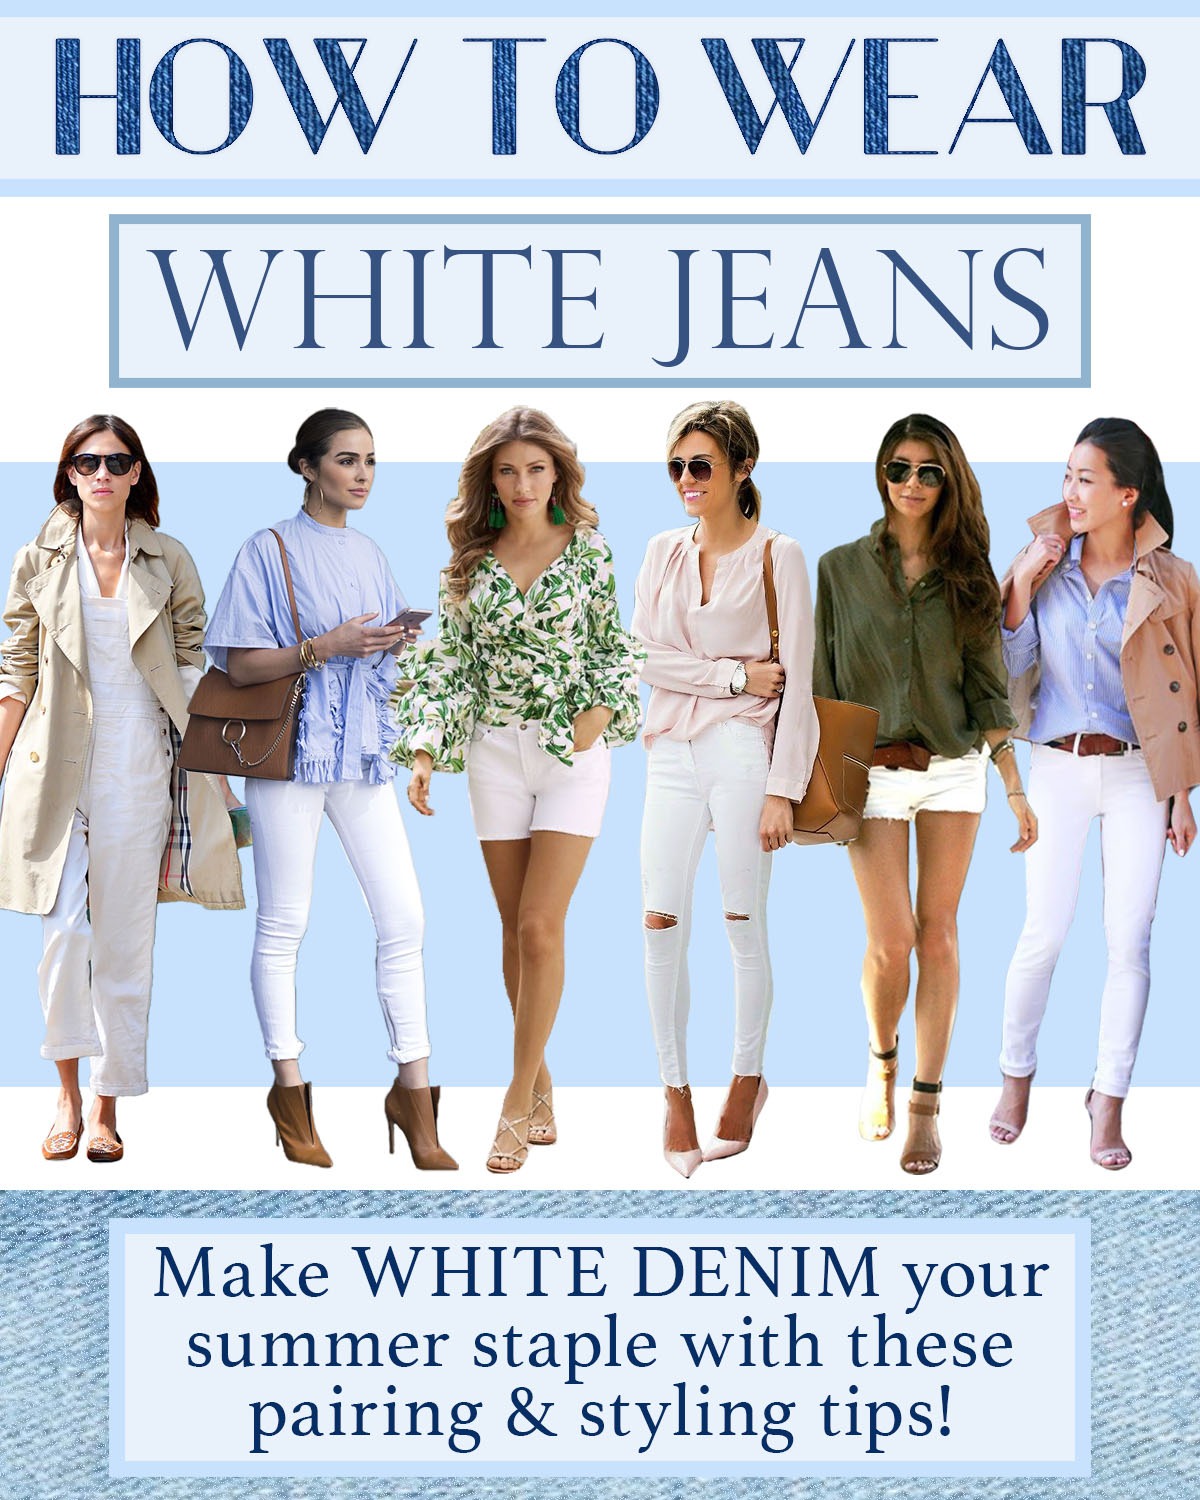 How To Wear White Jeans This Summer, According To 6 A-Listers